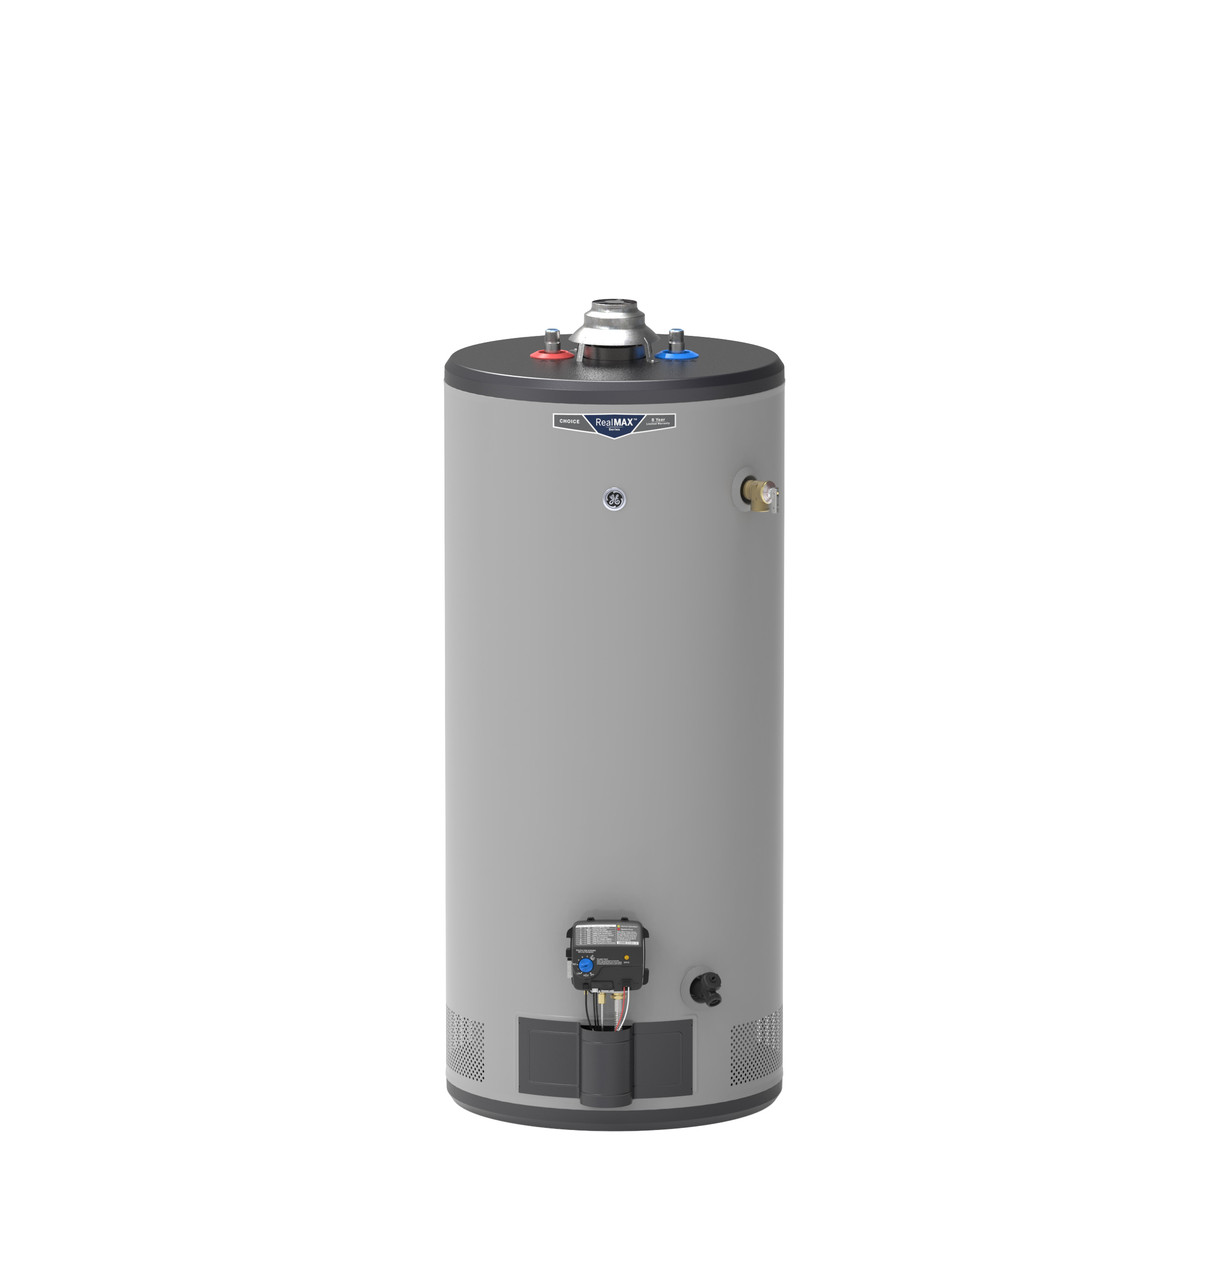 KlWY/SkuImages/6ab70aed-62e7-4f89-b995-7442aa21e5ba/GE-GAS-WATER-HEATER.jpg